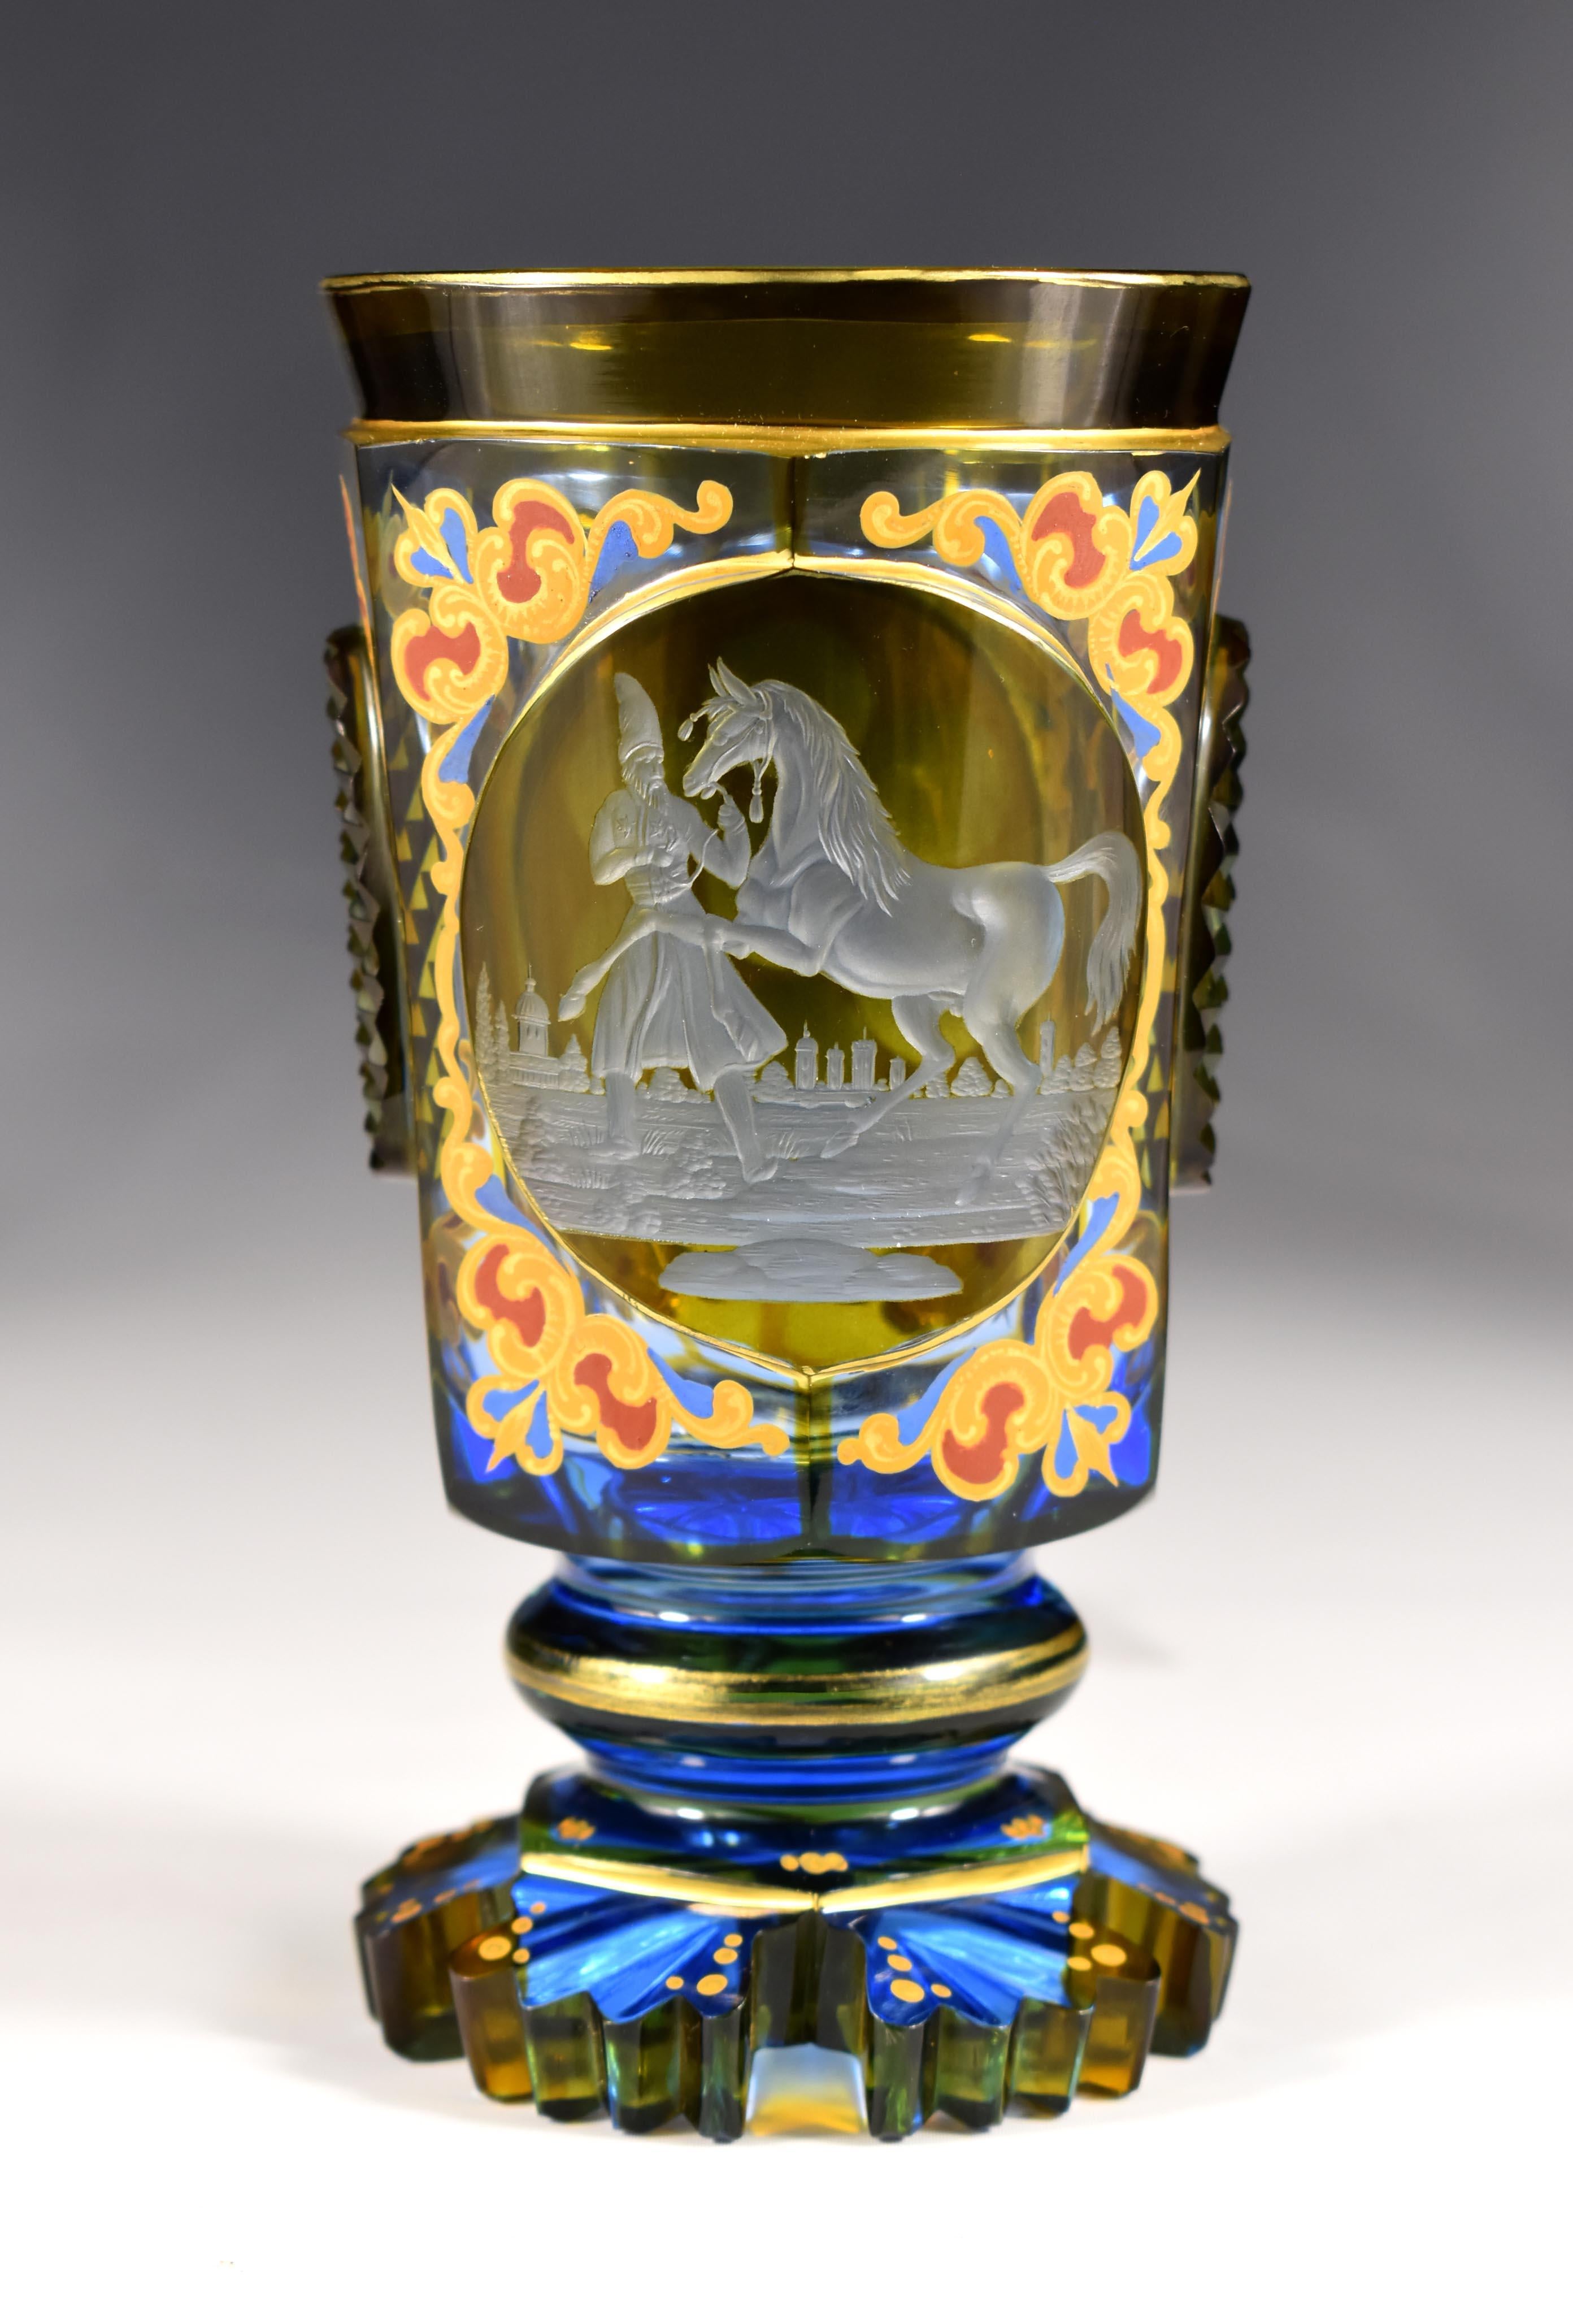 A goblet of blue glass, cut and with a yellow lazure , cut two medallions, in the first one there is an engraving of a Persian horse, In the second medallion are cut diminutive windows, Everything is complemented by an ornamental painting that is